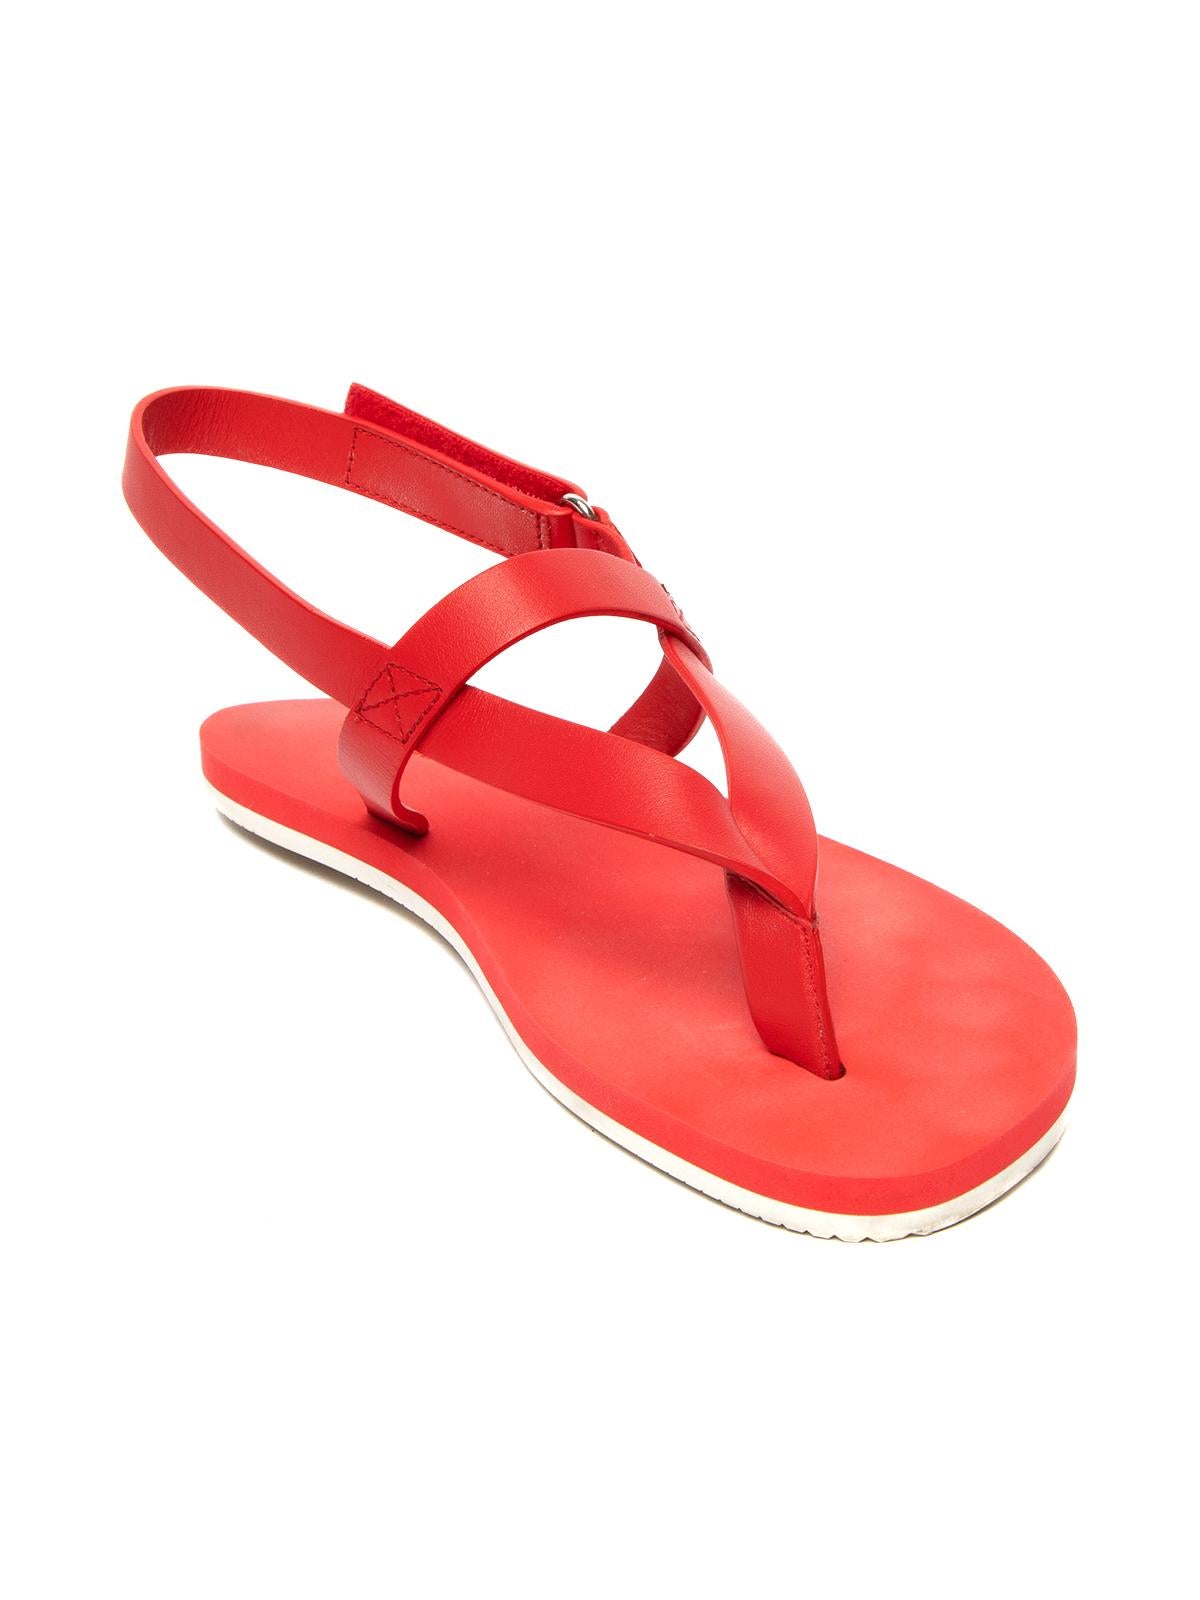 CONDITION is Good. Some wear to sandals is evident. Slight discolouration on insole and signs of general use on outsoles on this used Hermes designer resale item. Details Tahiti sandal Red Leather Flats Sling back Velcro fastening Rubber soles Made